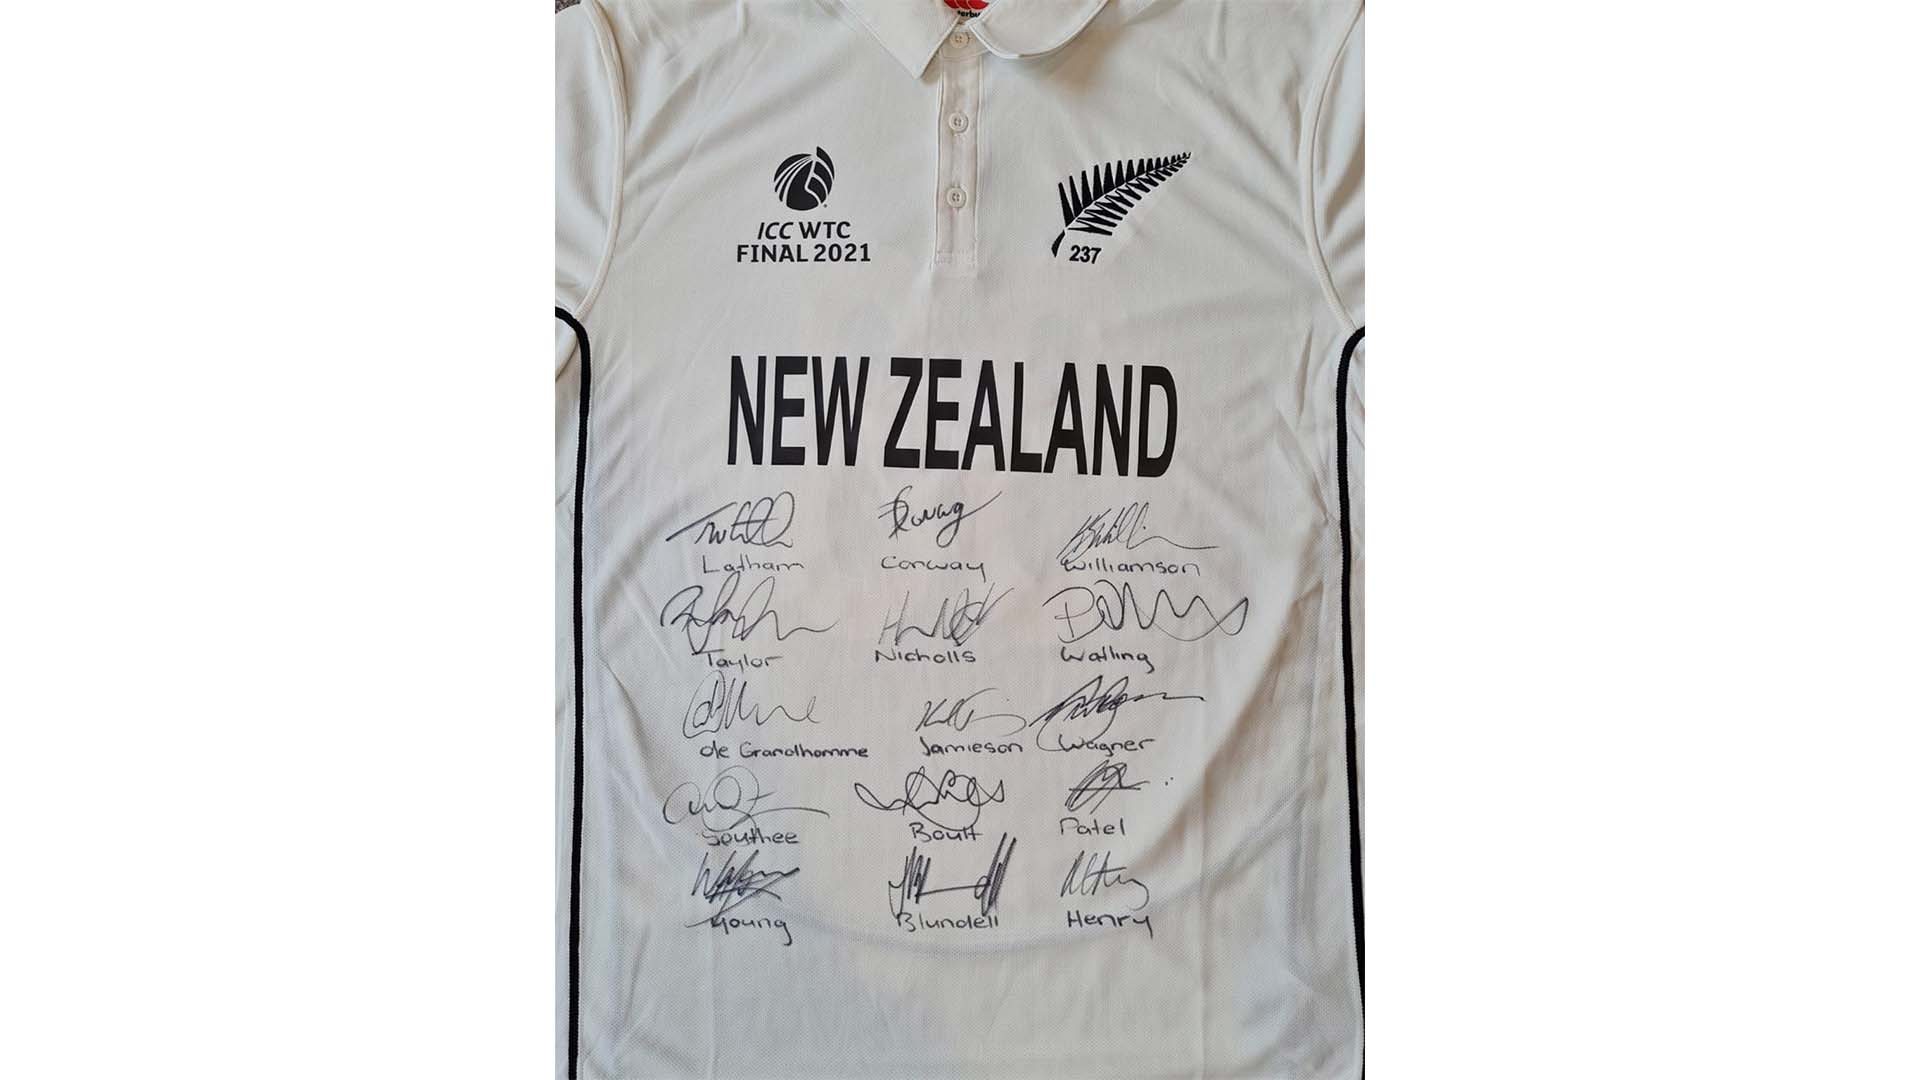 A signed Tim Southee World Test Championship Shirt, auctioned on Trade Me, receives a high bid.